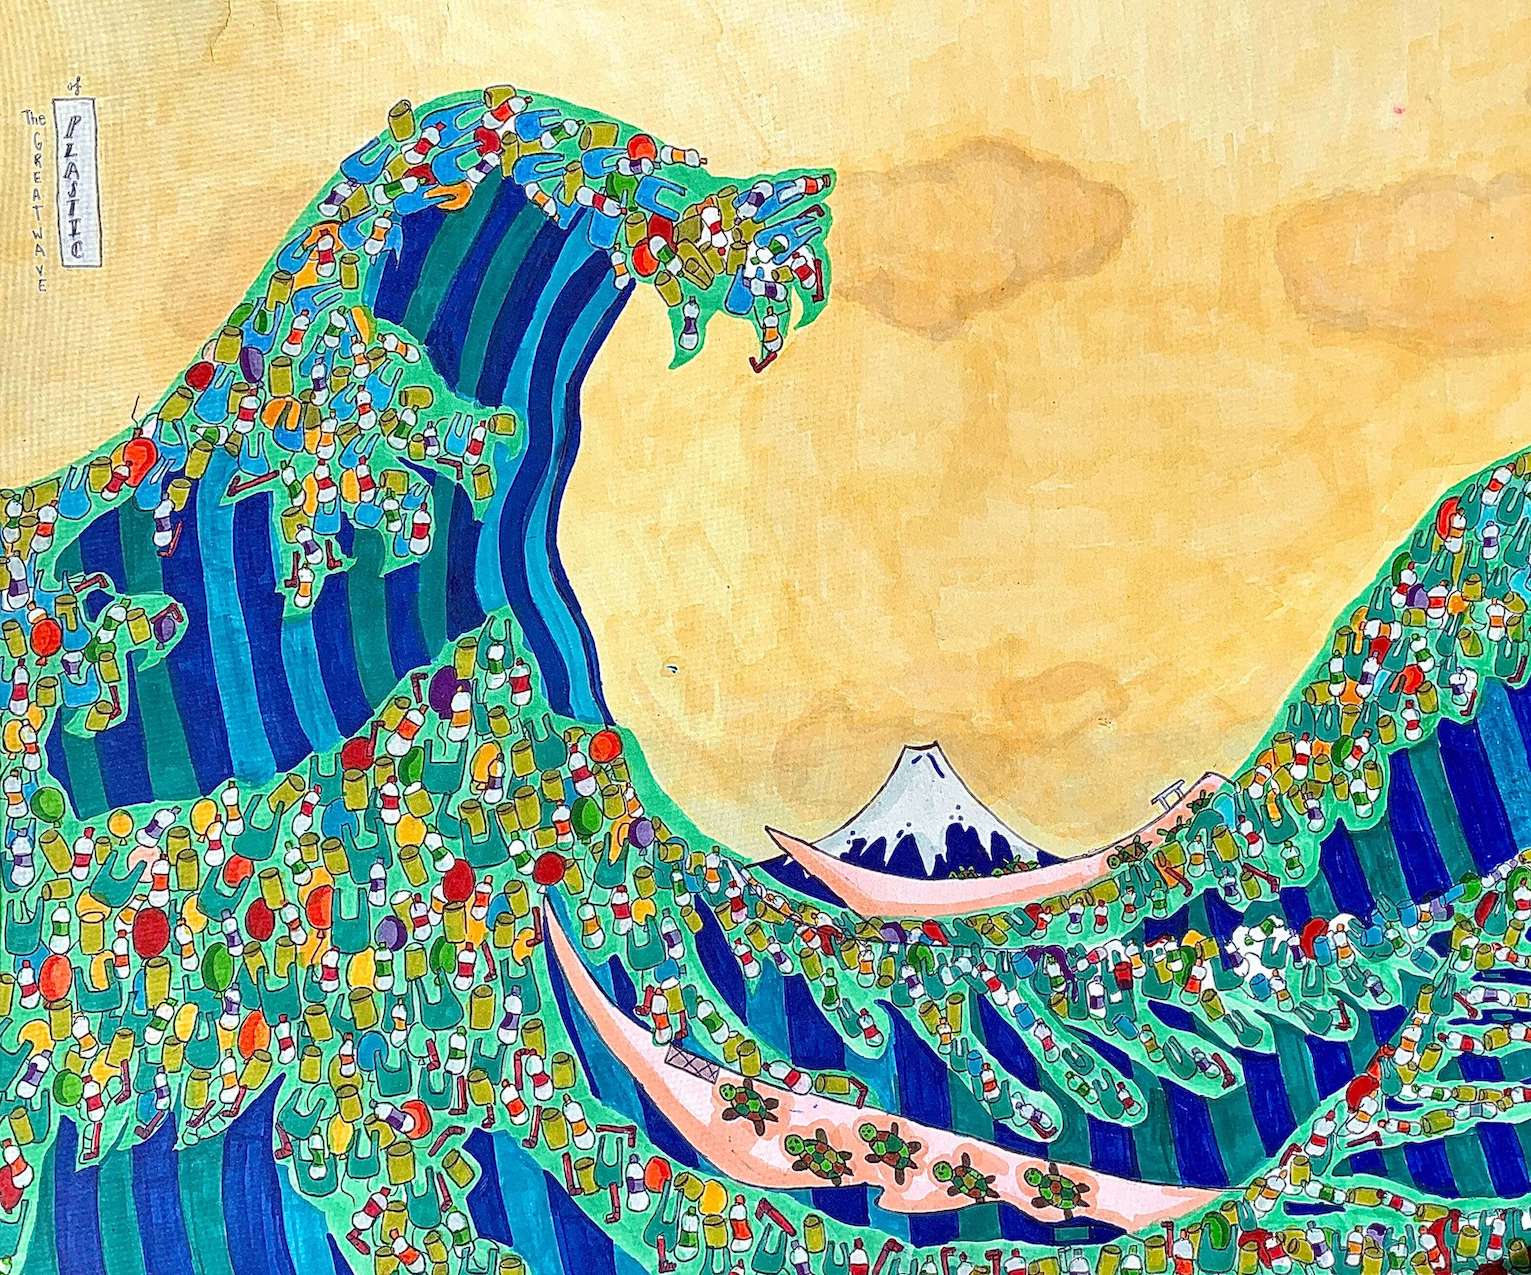 Former First Place Winner (2021): "The Great Wave of Plastic" - by Venus Aradhya, USA